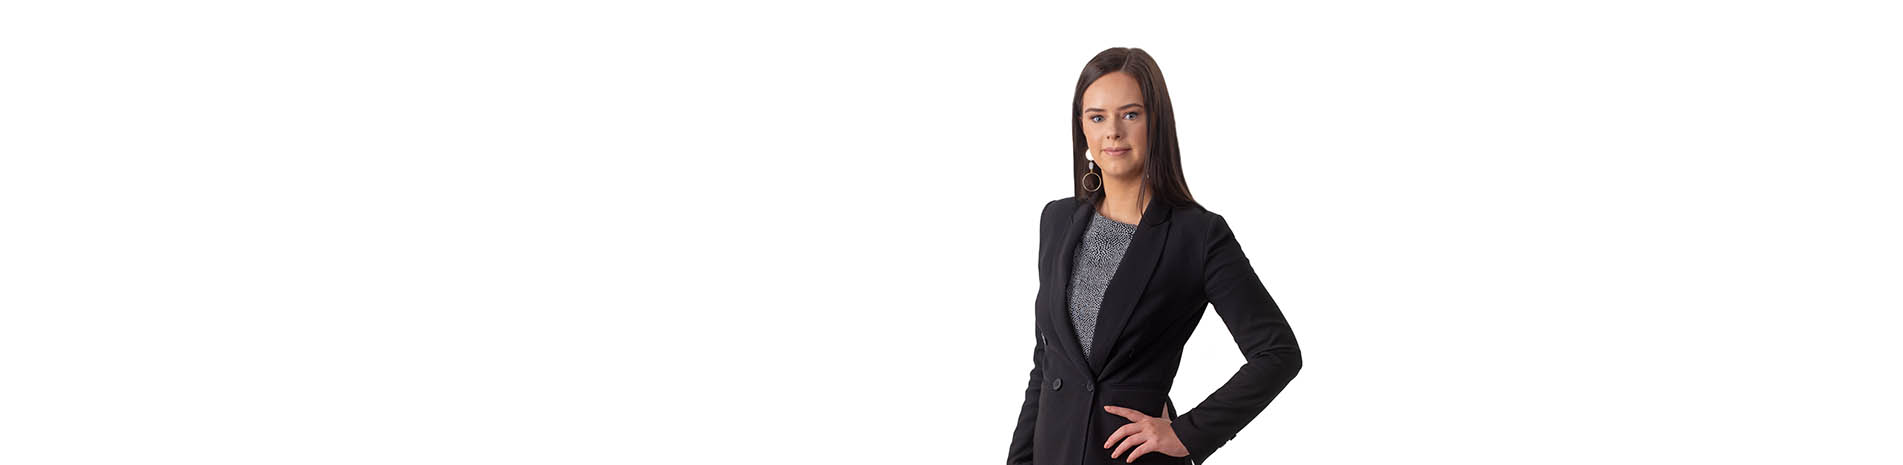 Ashleigh Wallace criminal defence lawyer Melbourne